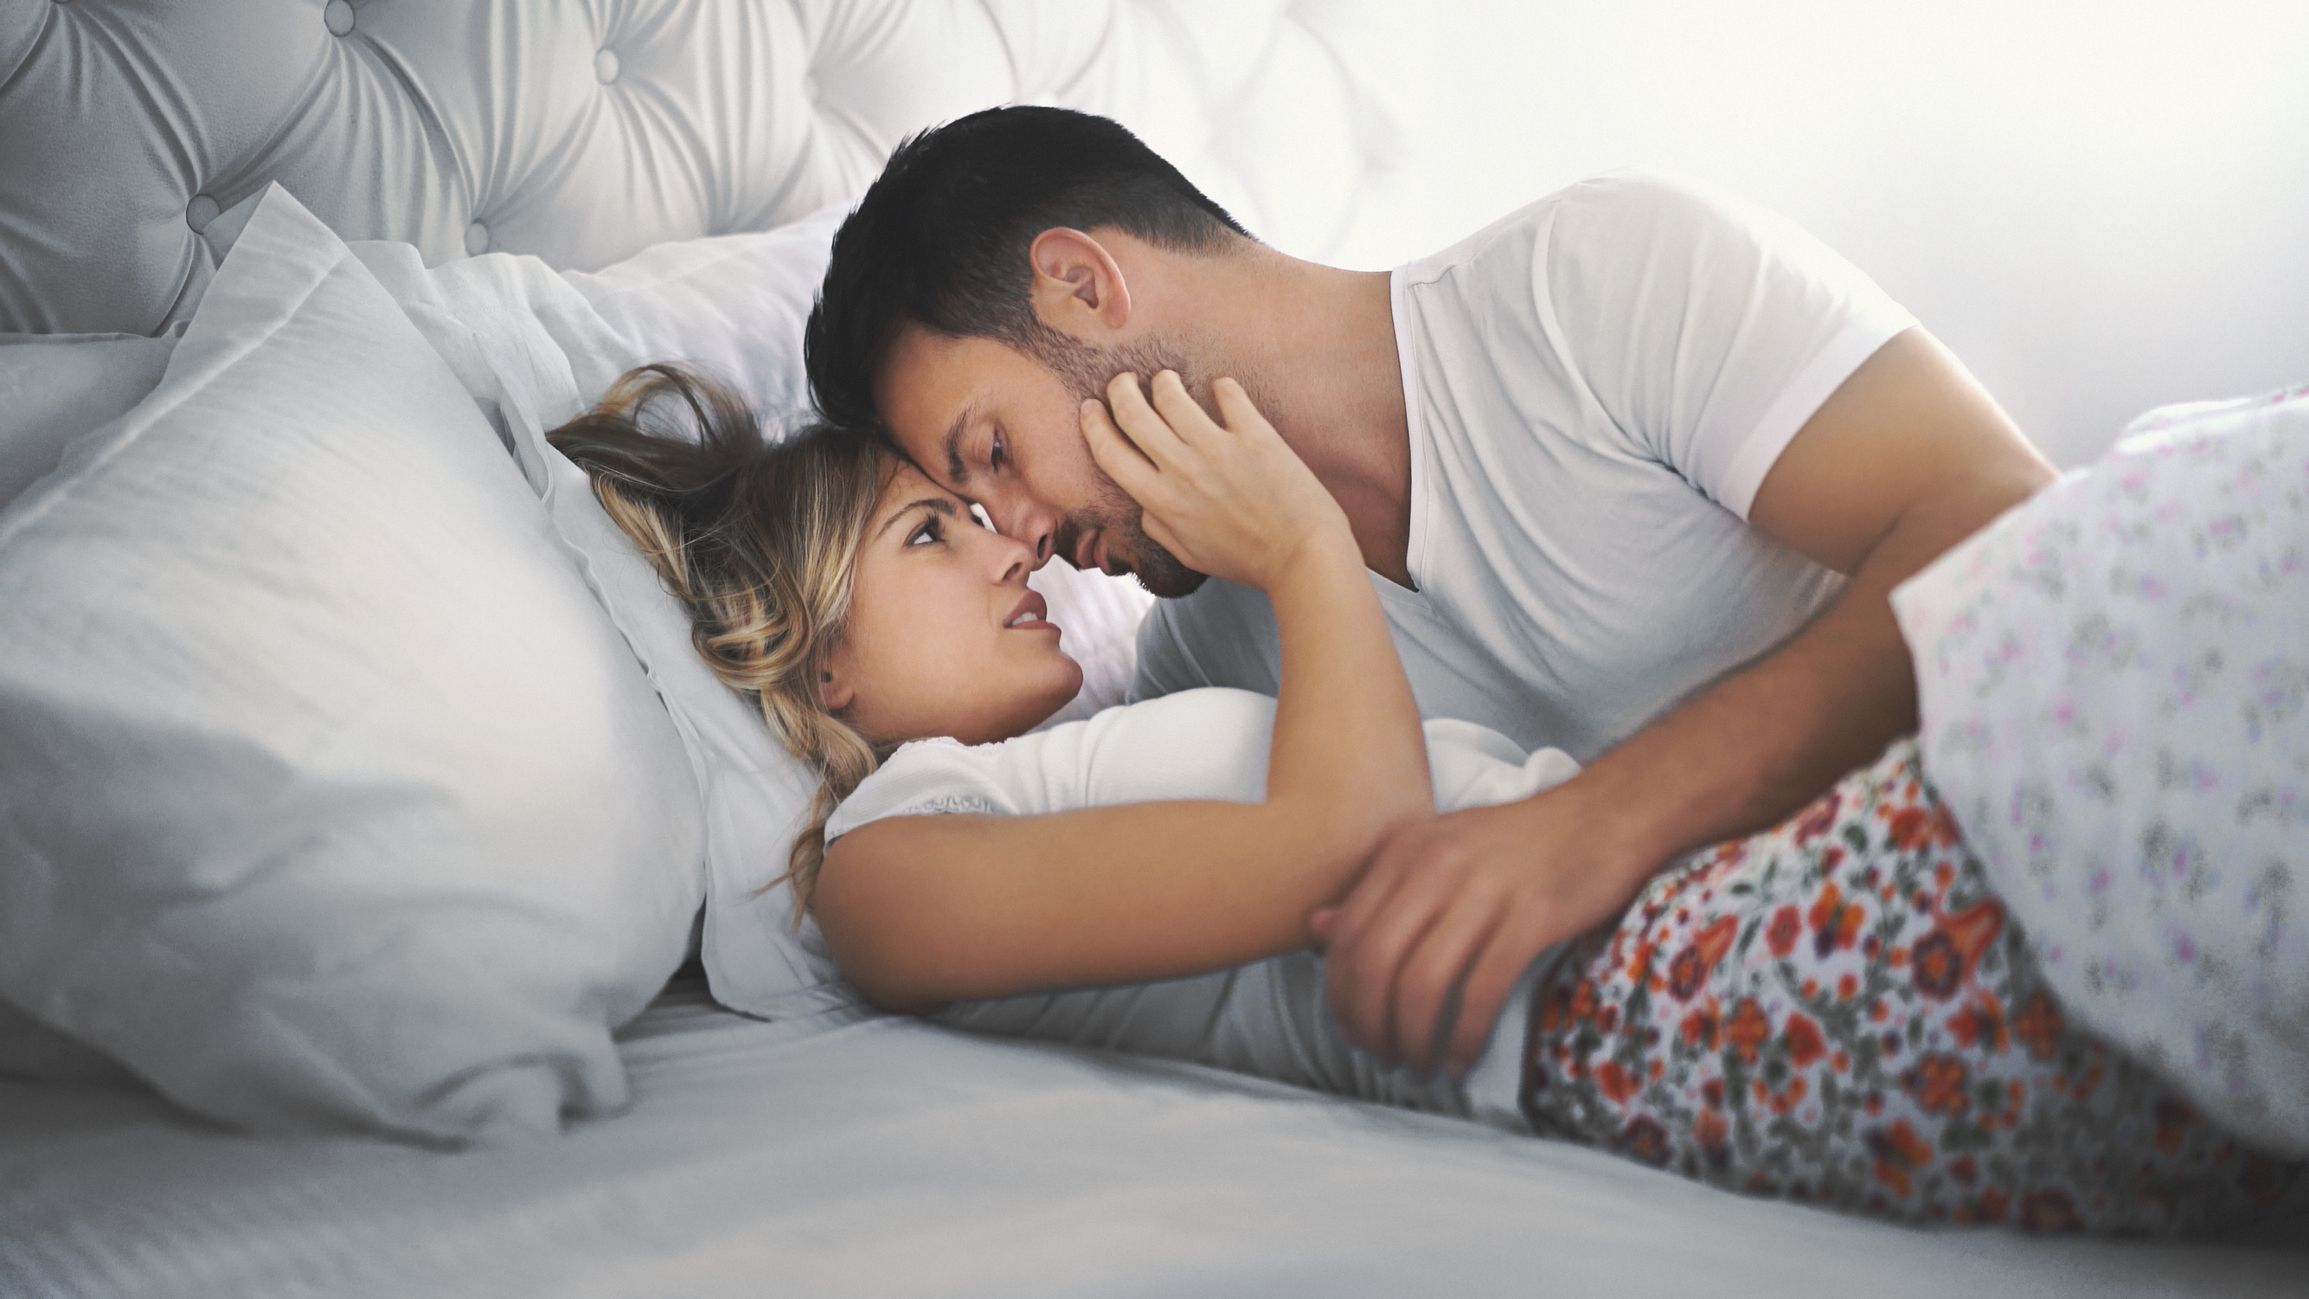 Common Couple Sleeping Positions and What They Mean